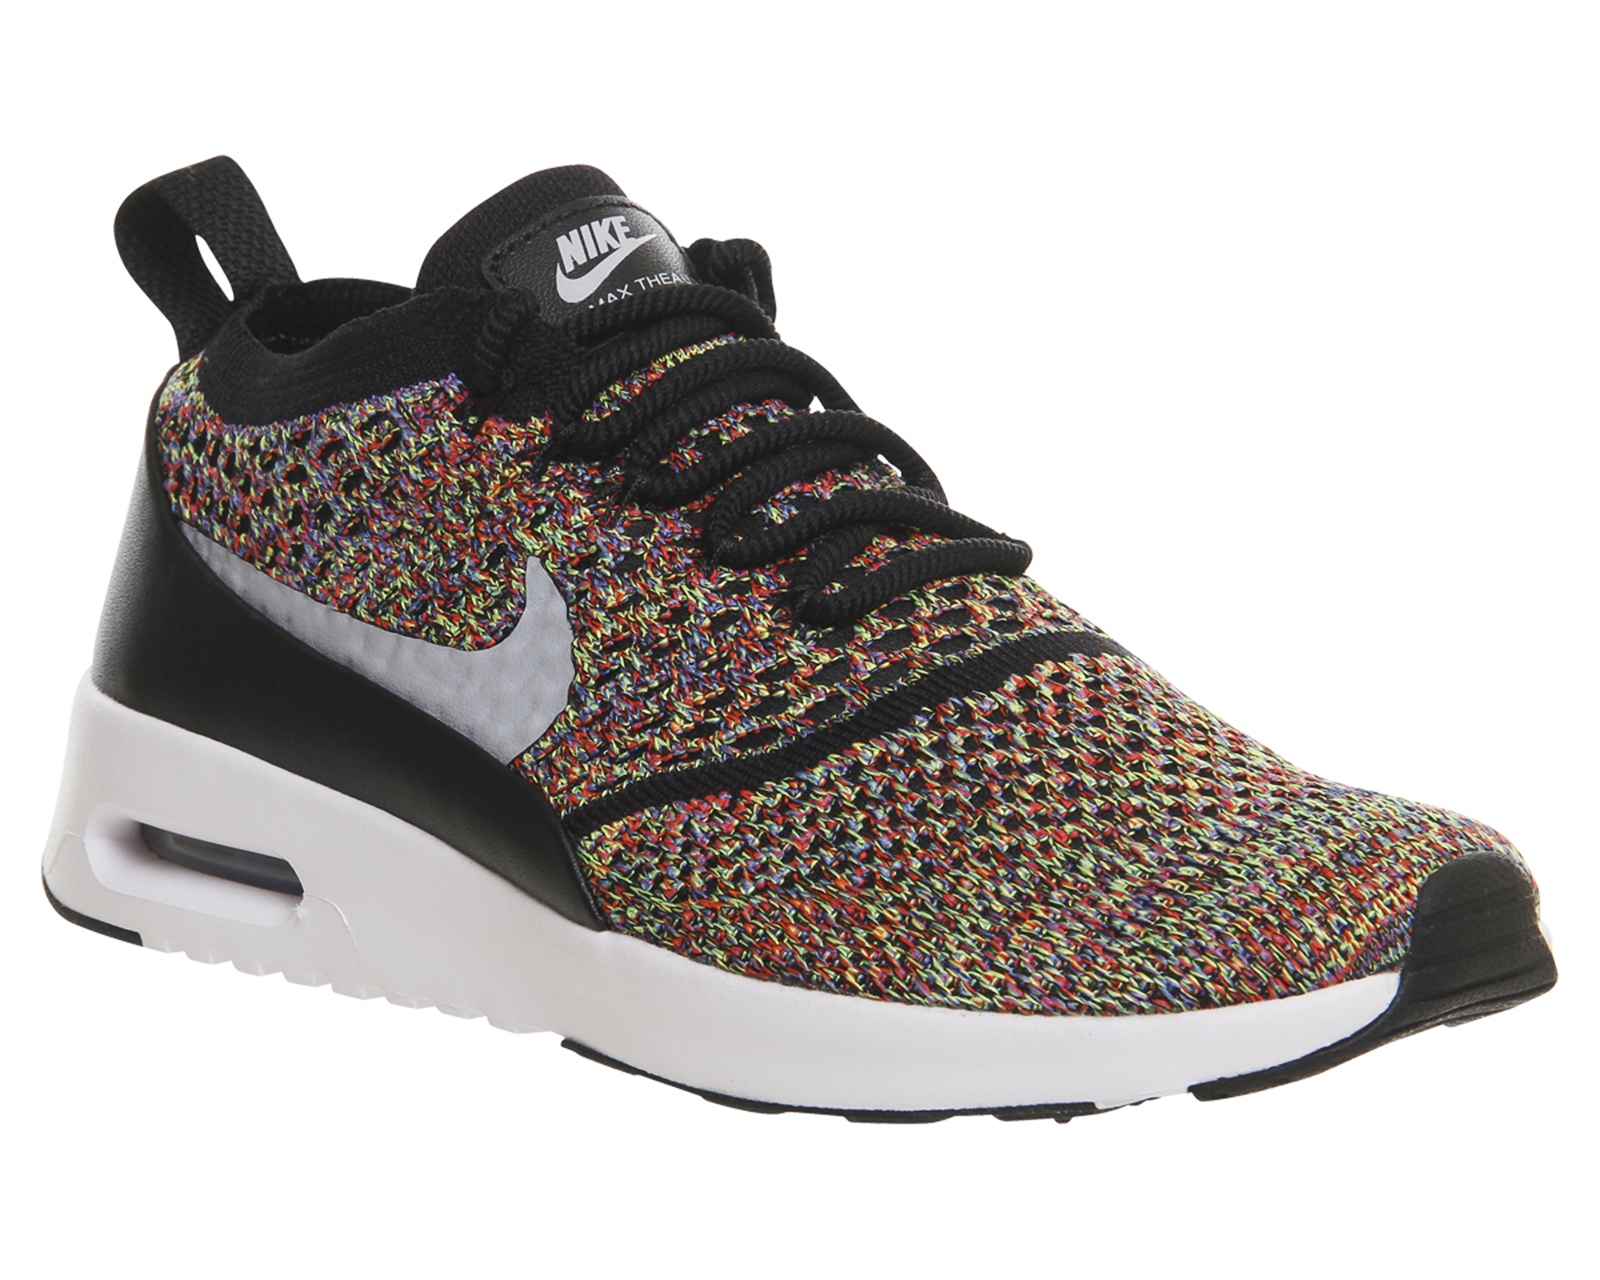 Nike Air Max Thea Flyknit Multi Black Blue - Hers trainers